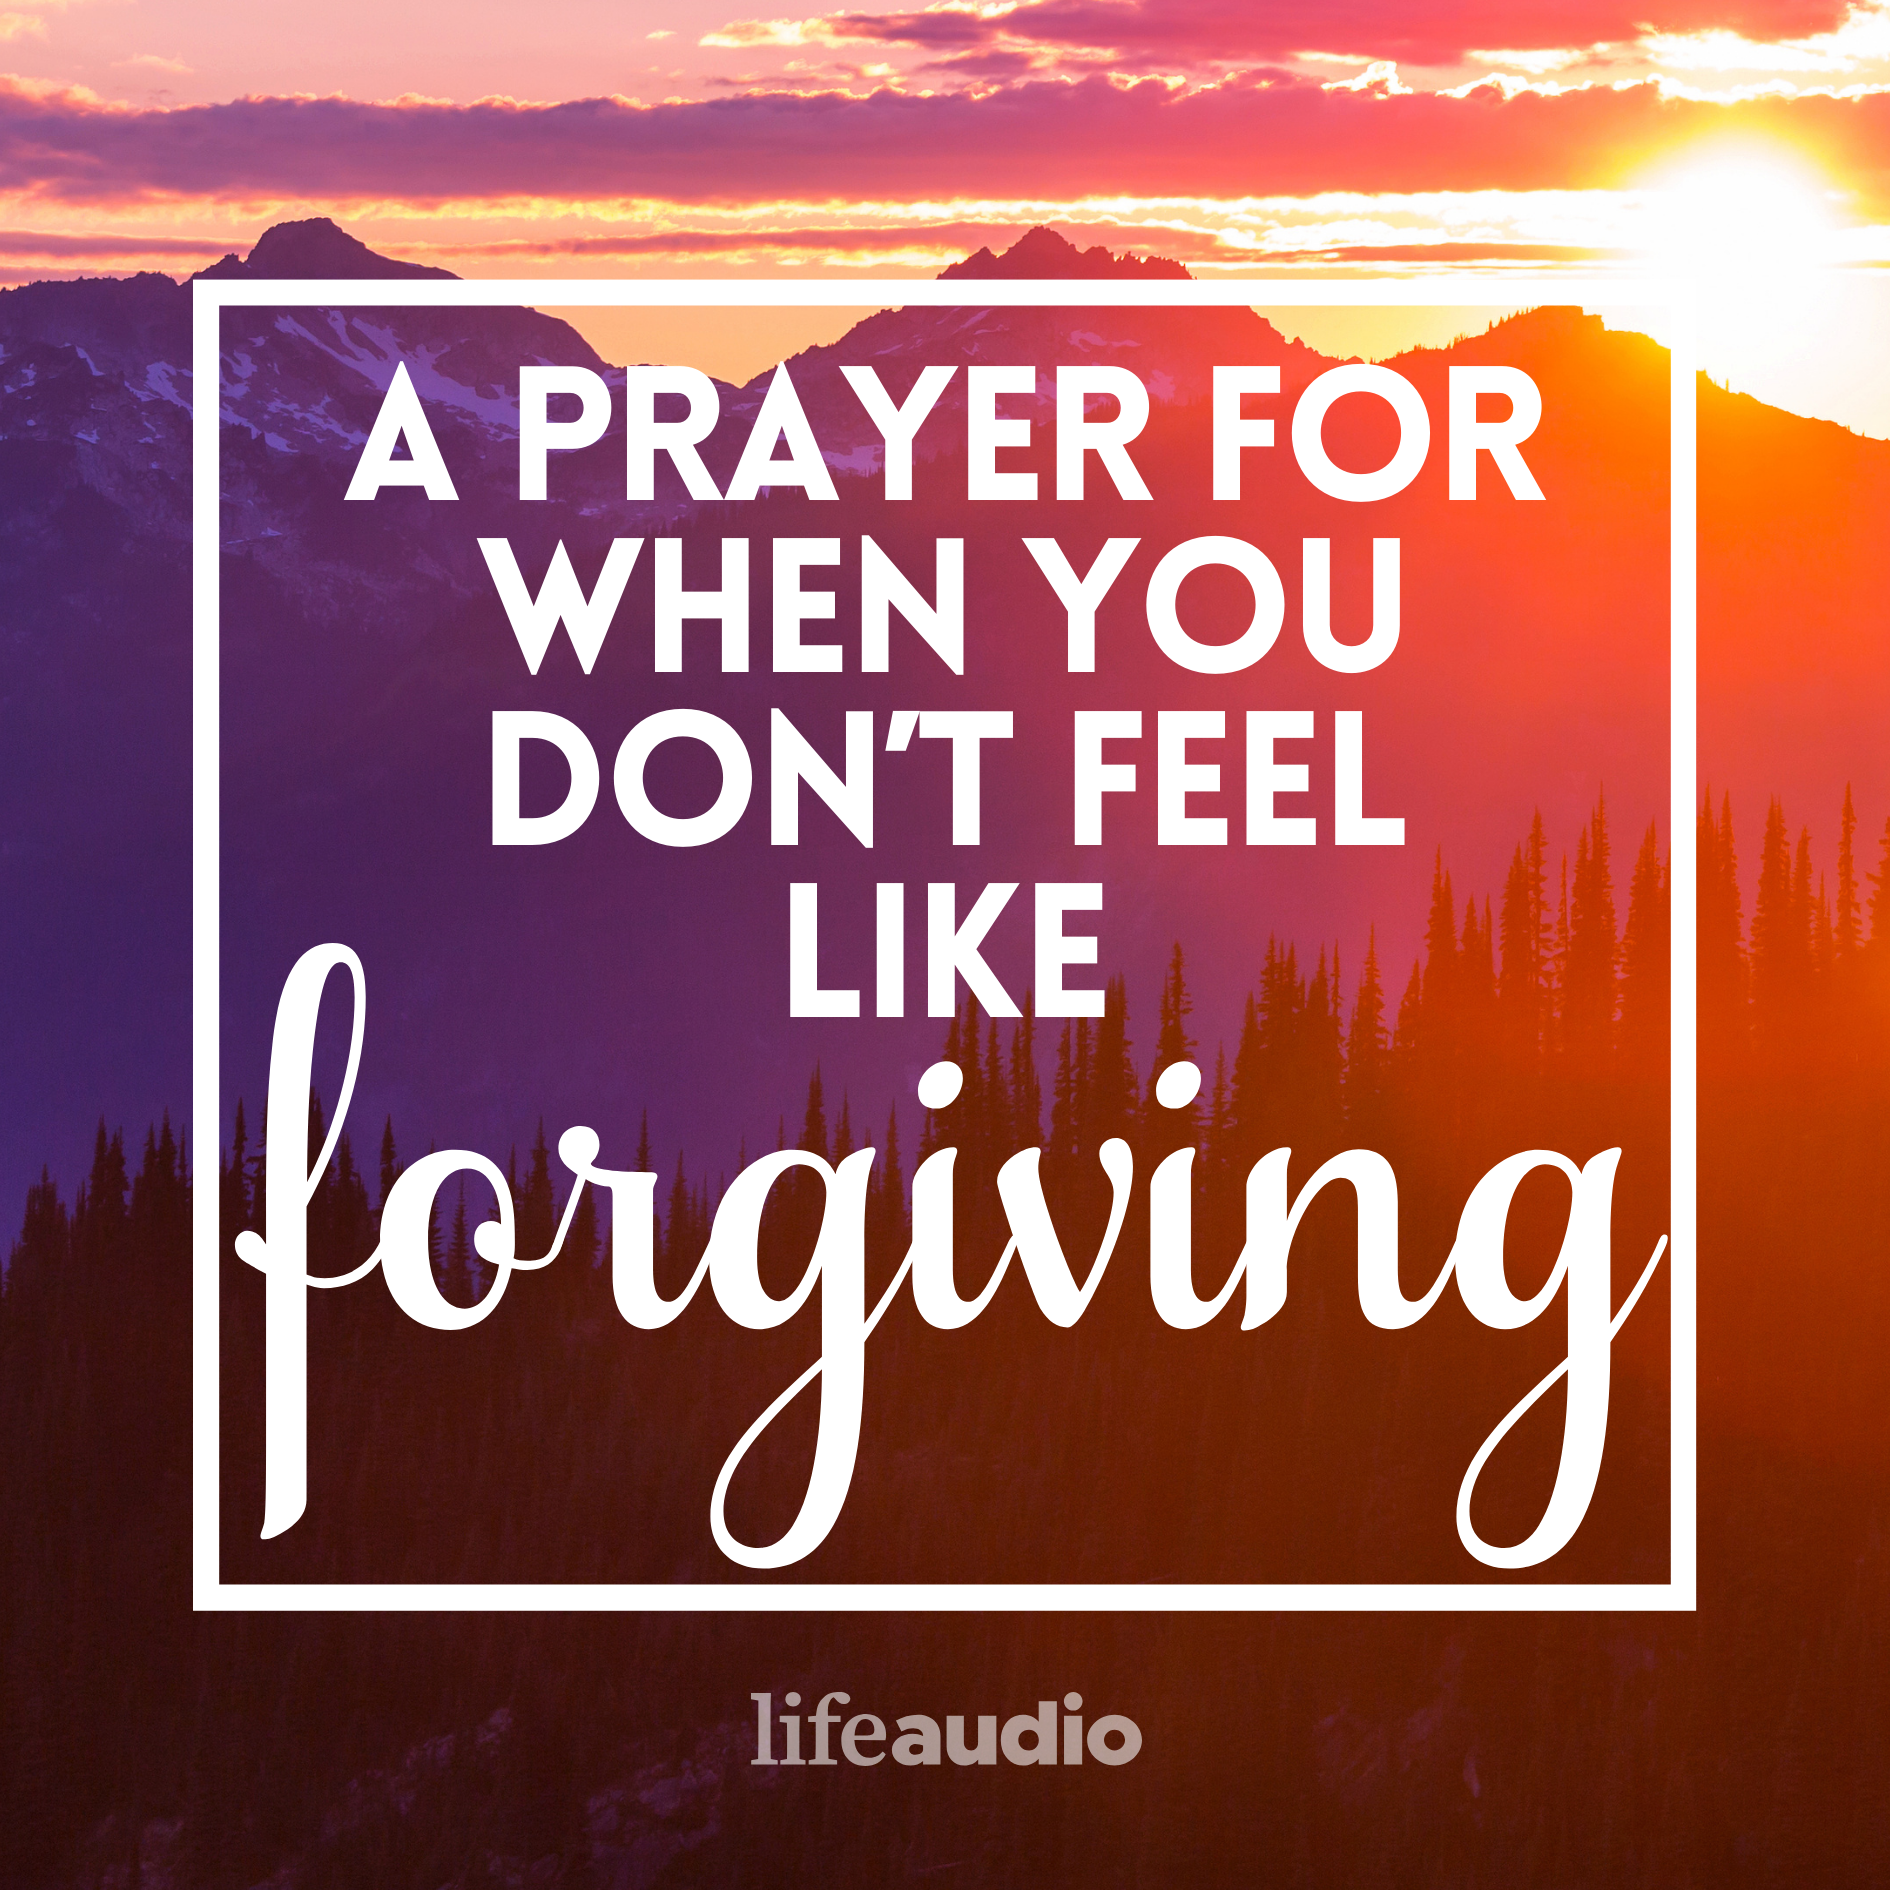 A Prayer for When You Don't Feel Like Forgiving